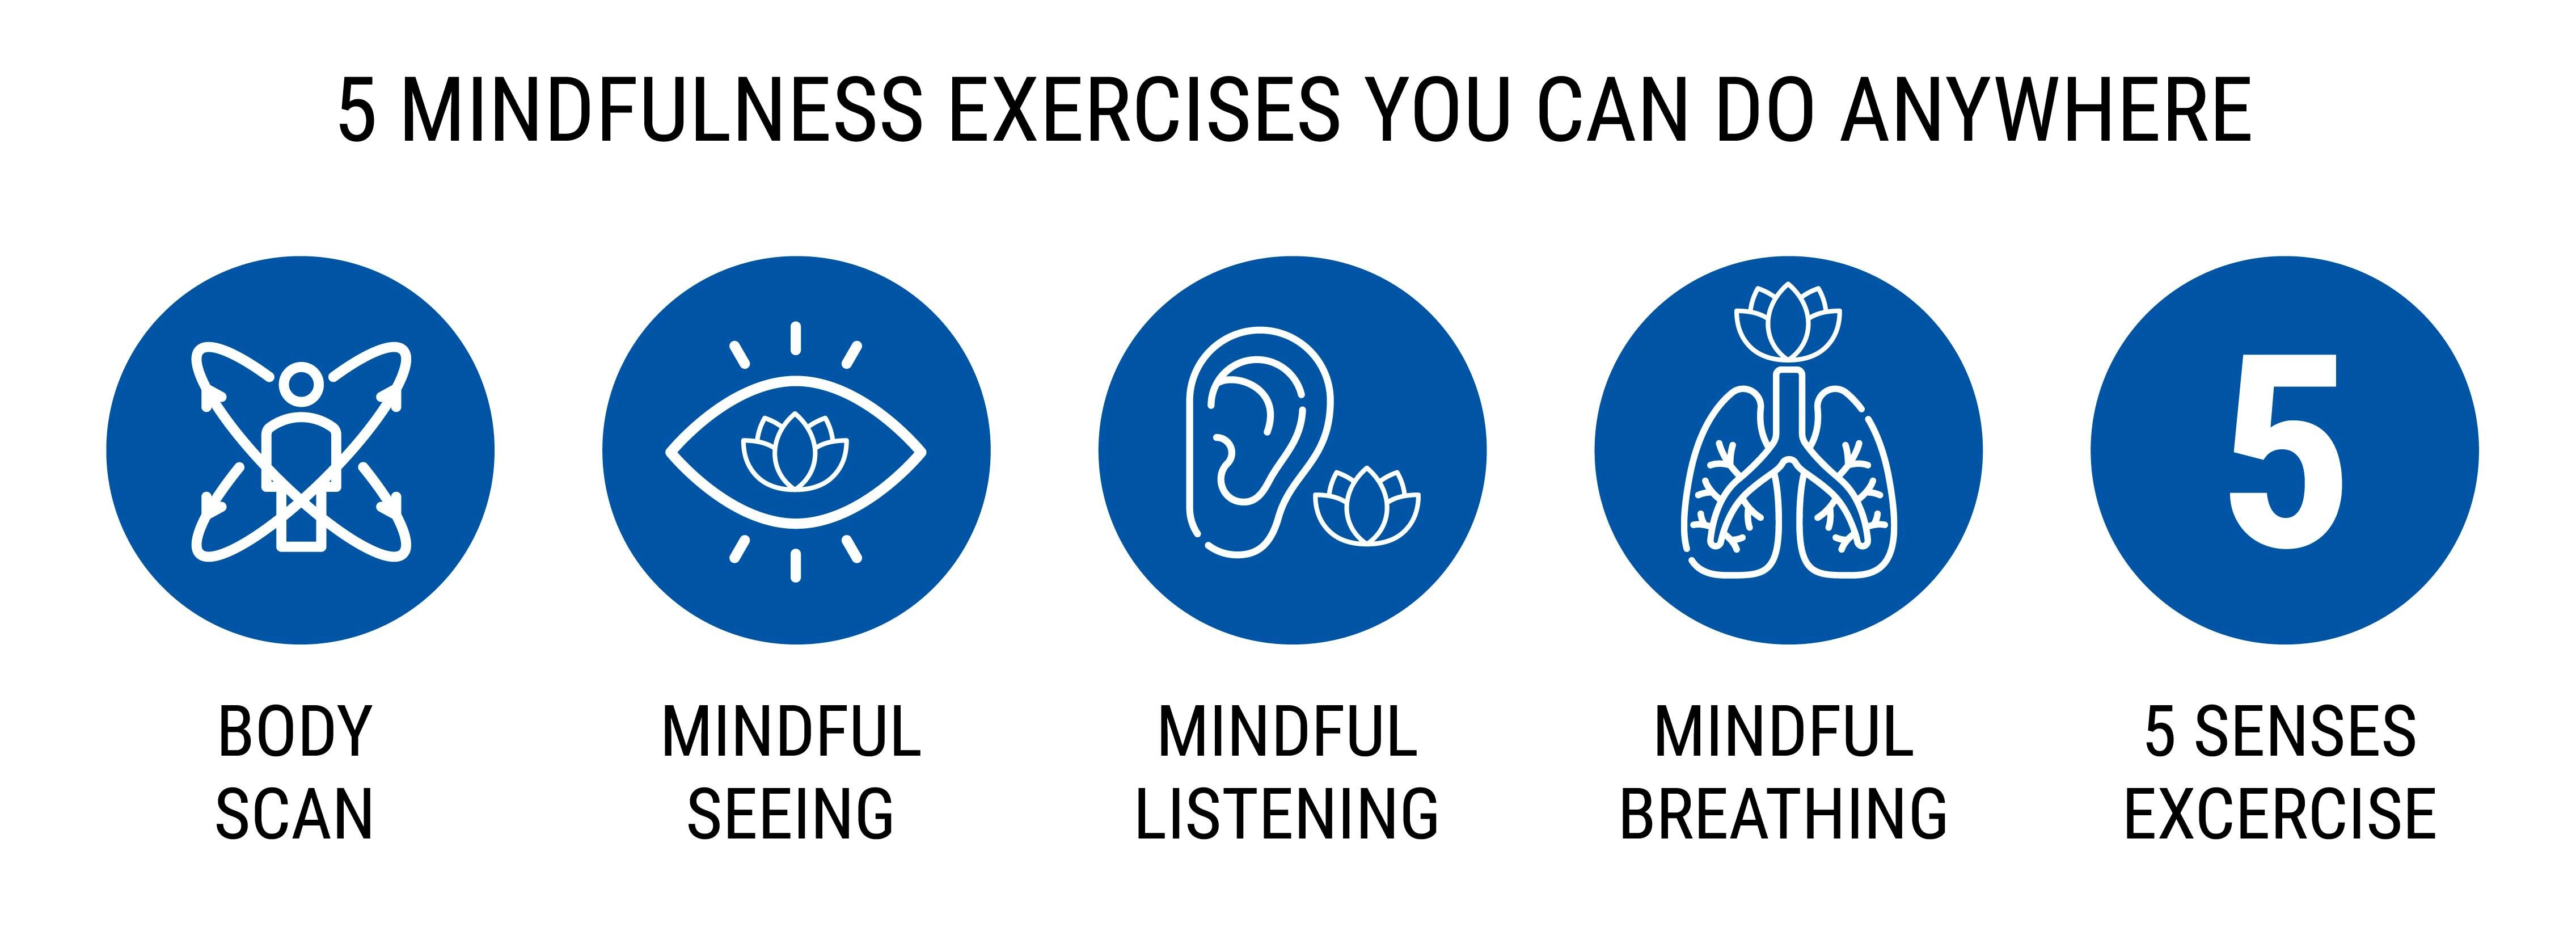 5 MINDFULNESS EXERCISES YOU CAN DO ANYWHERE